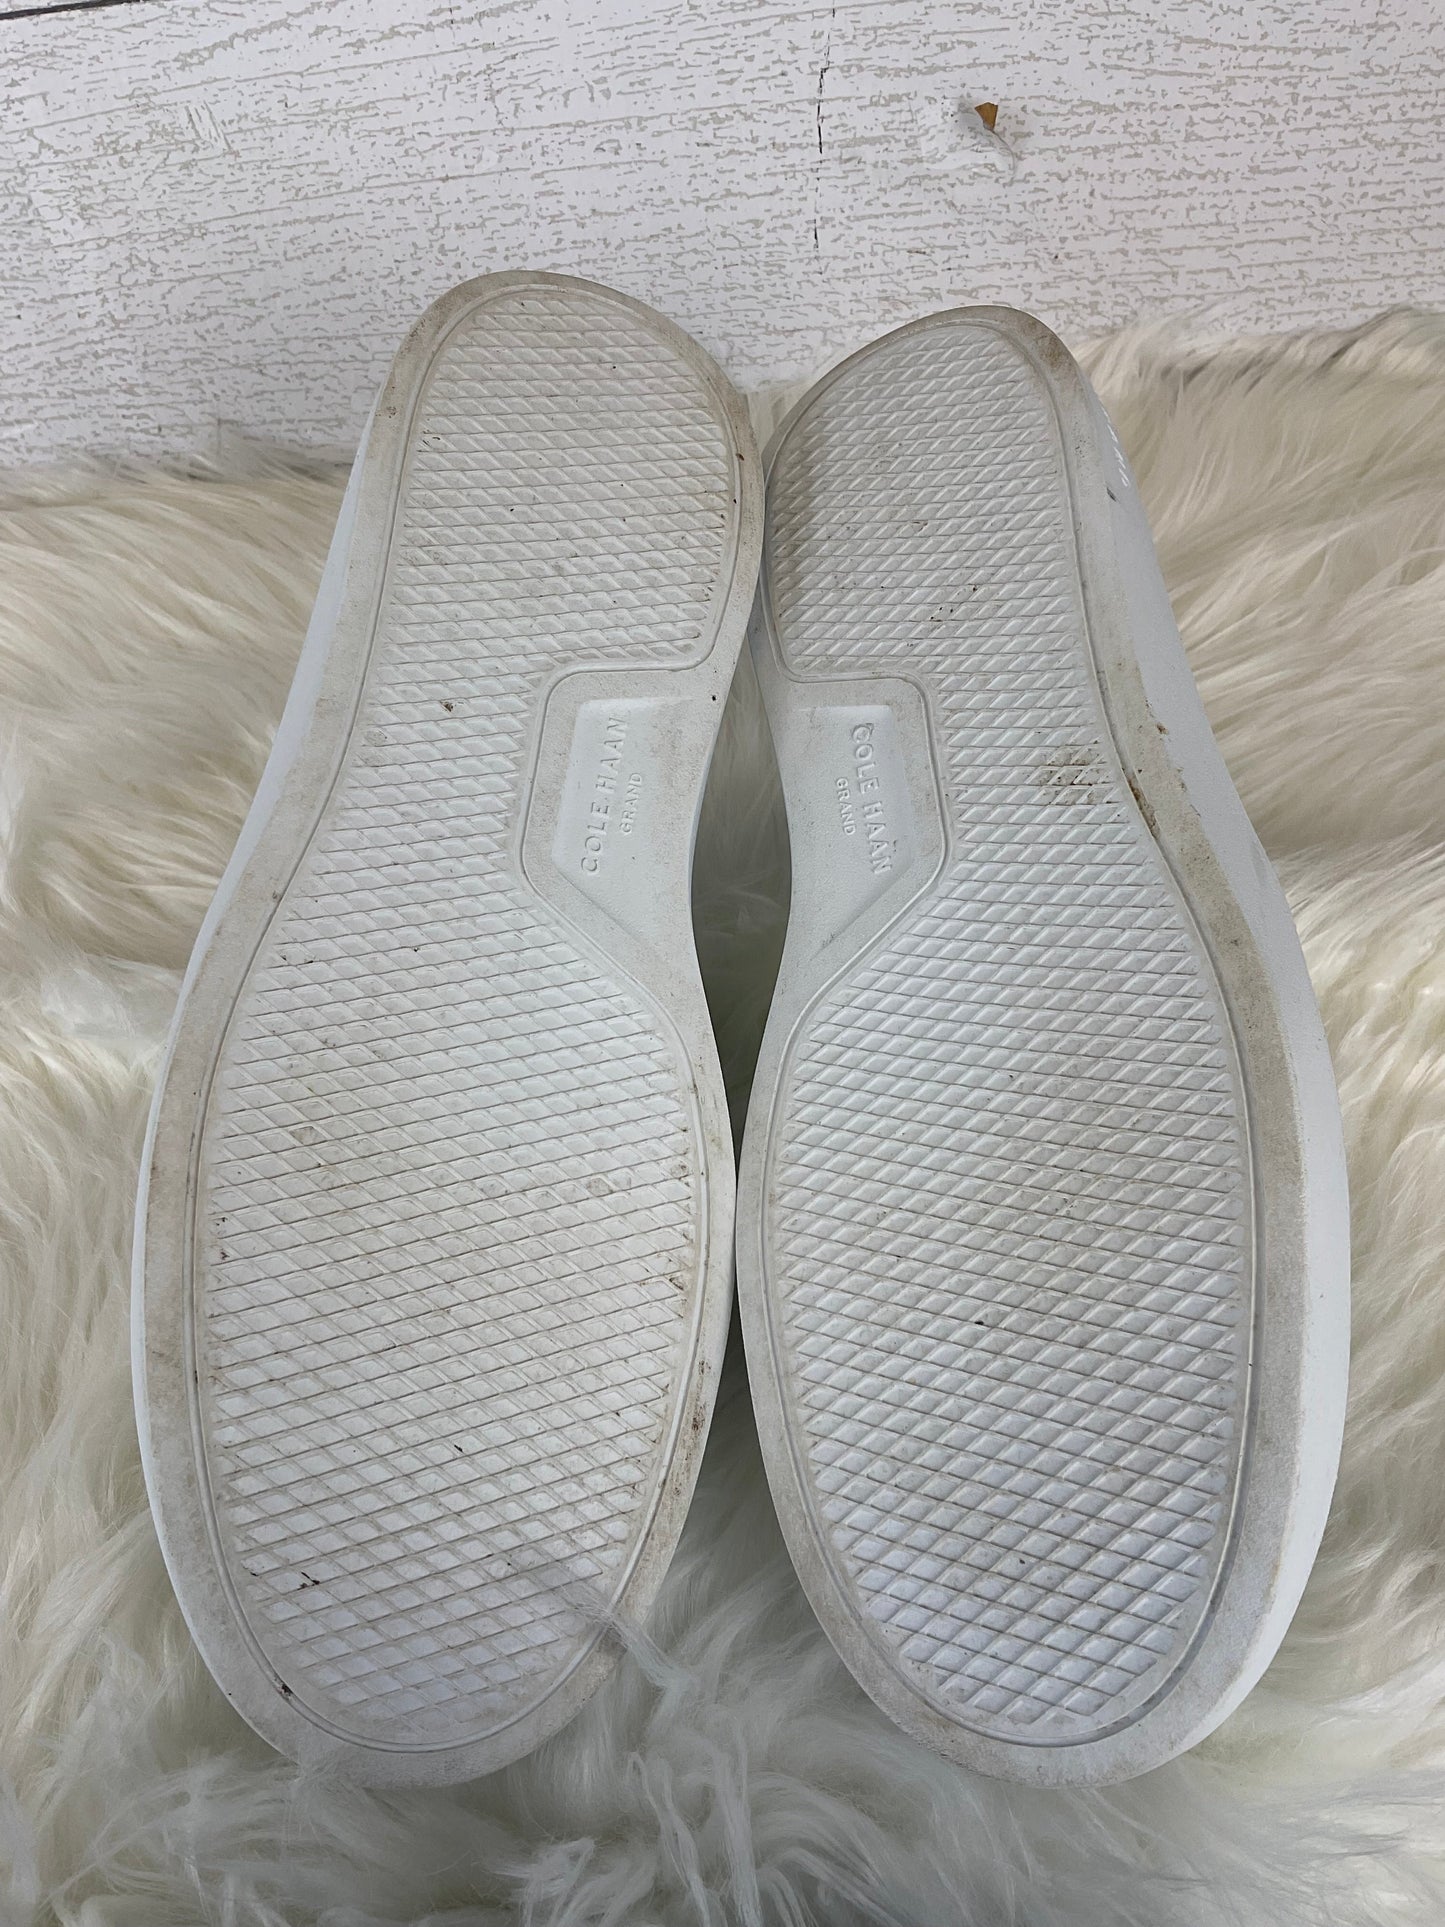 Shoes Designer By Cole-haan  Size: 8.5